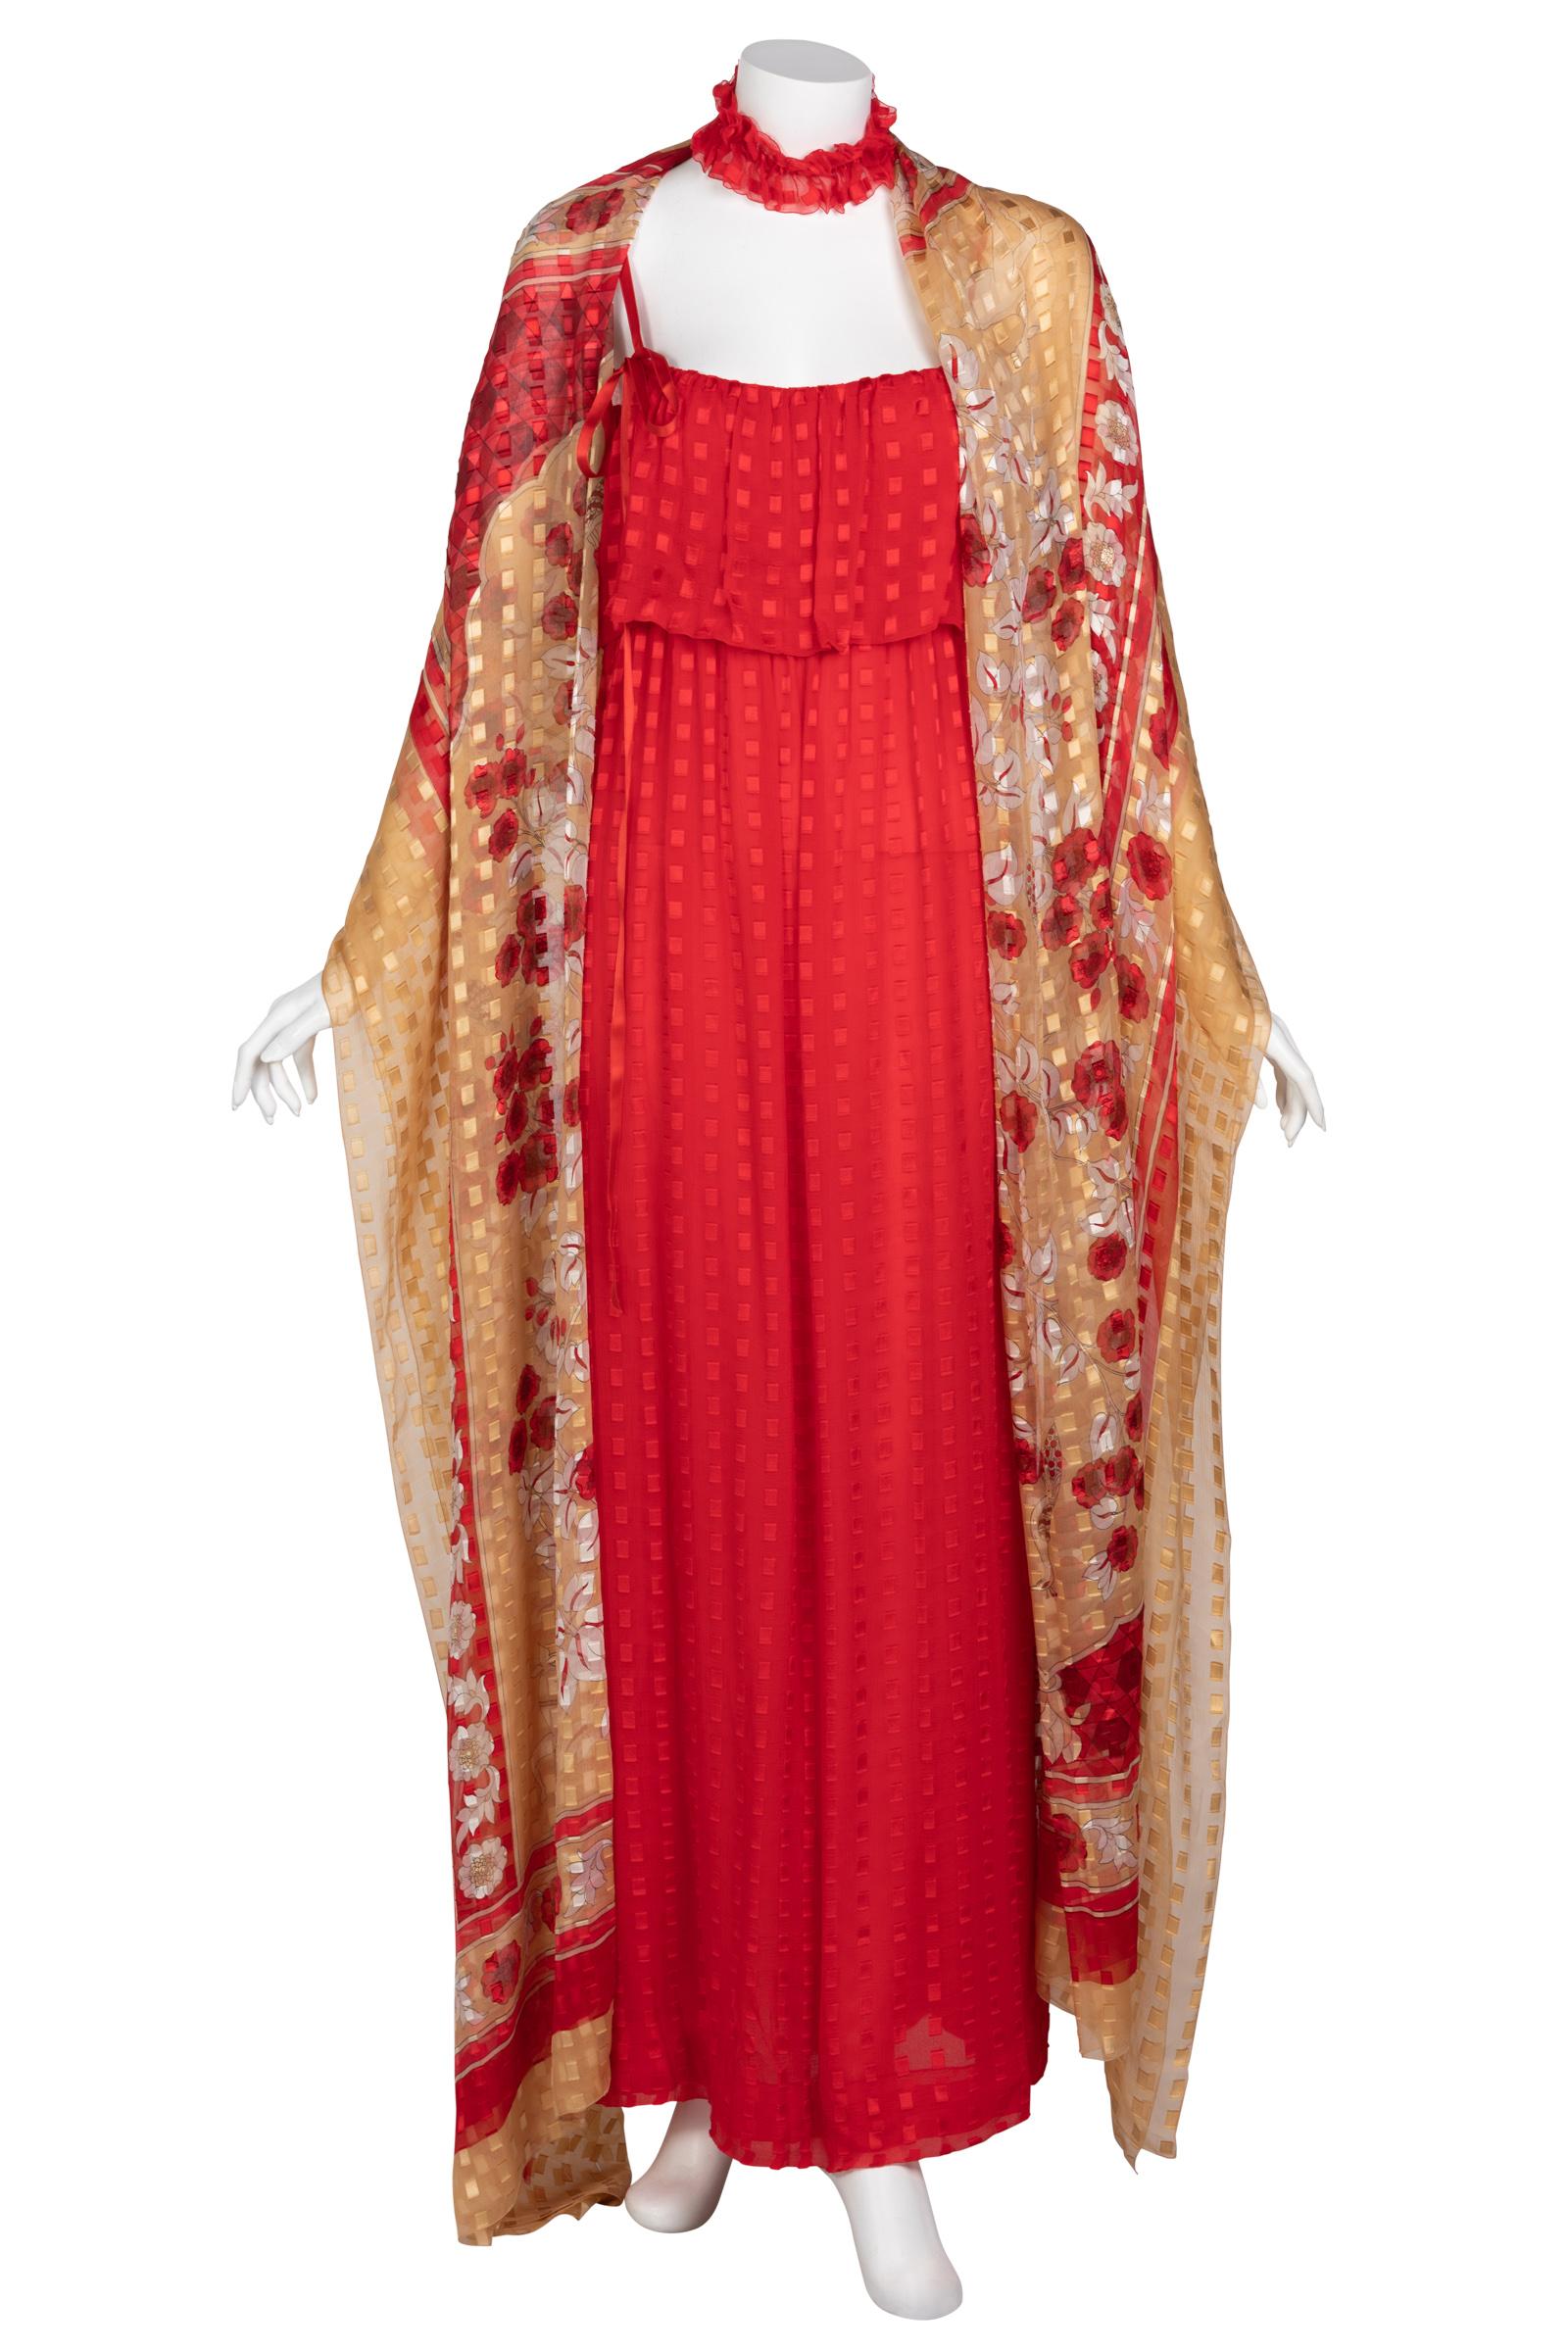 Christian Dior Red Maxi Dress & Shawl Documented 1970s 5